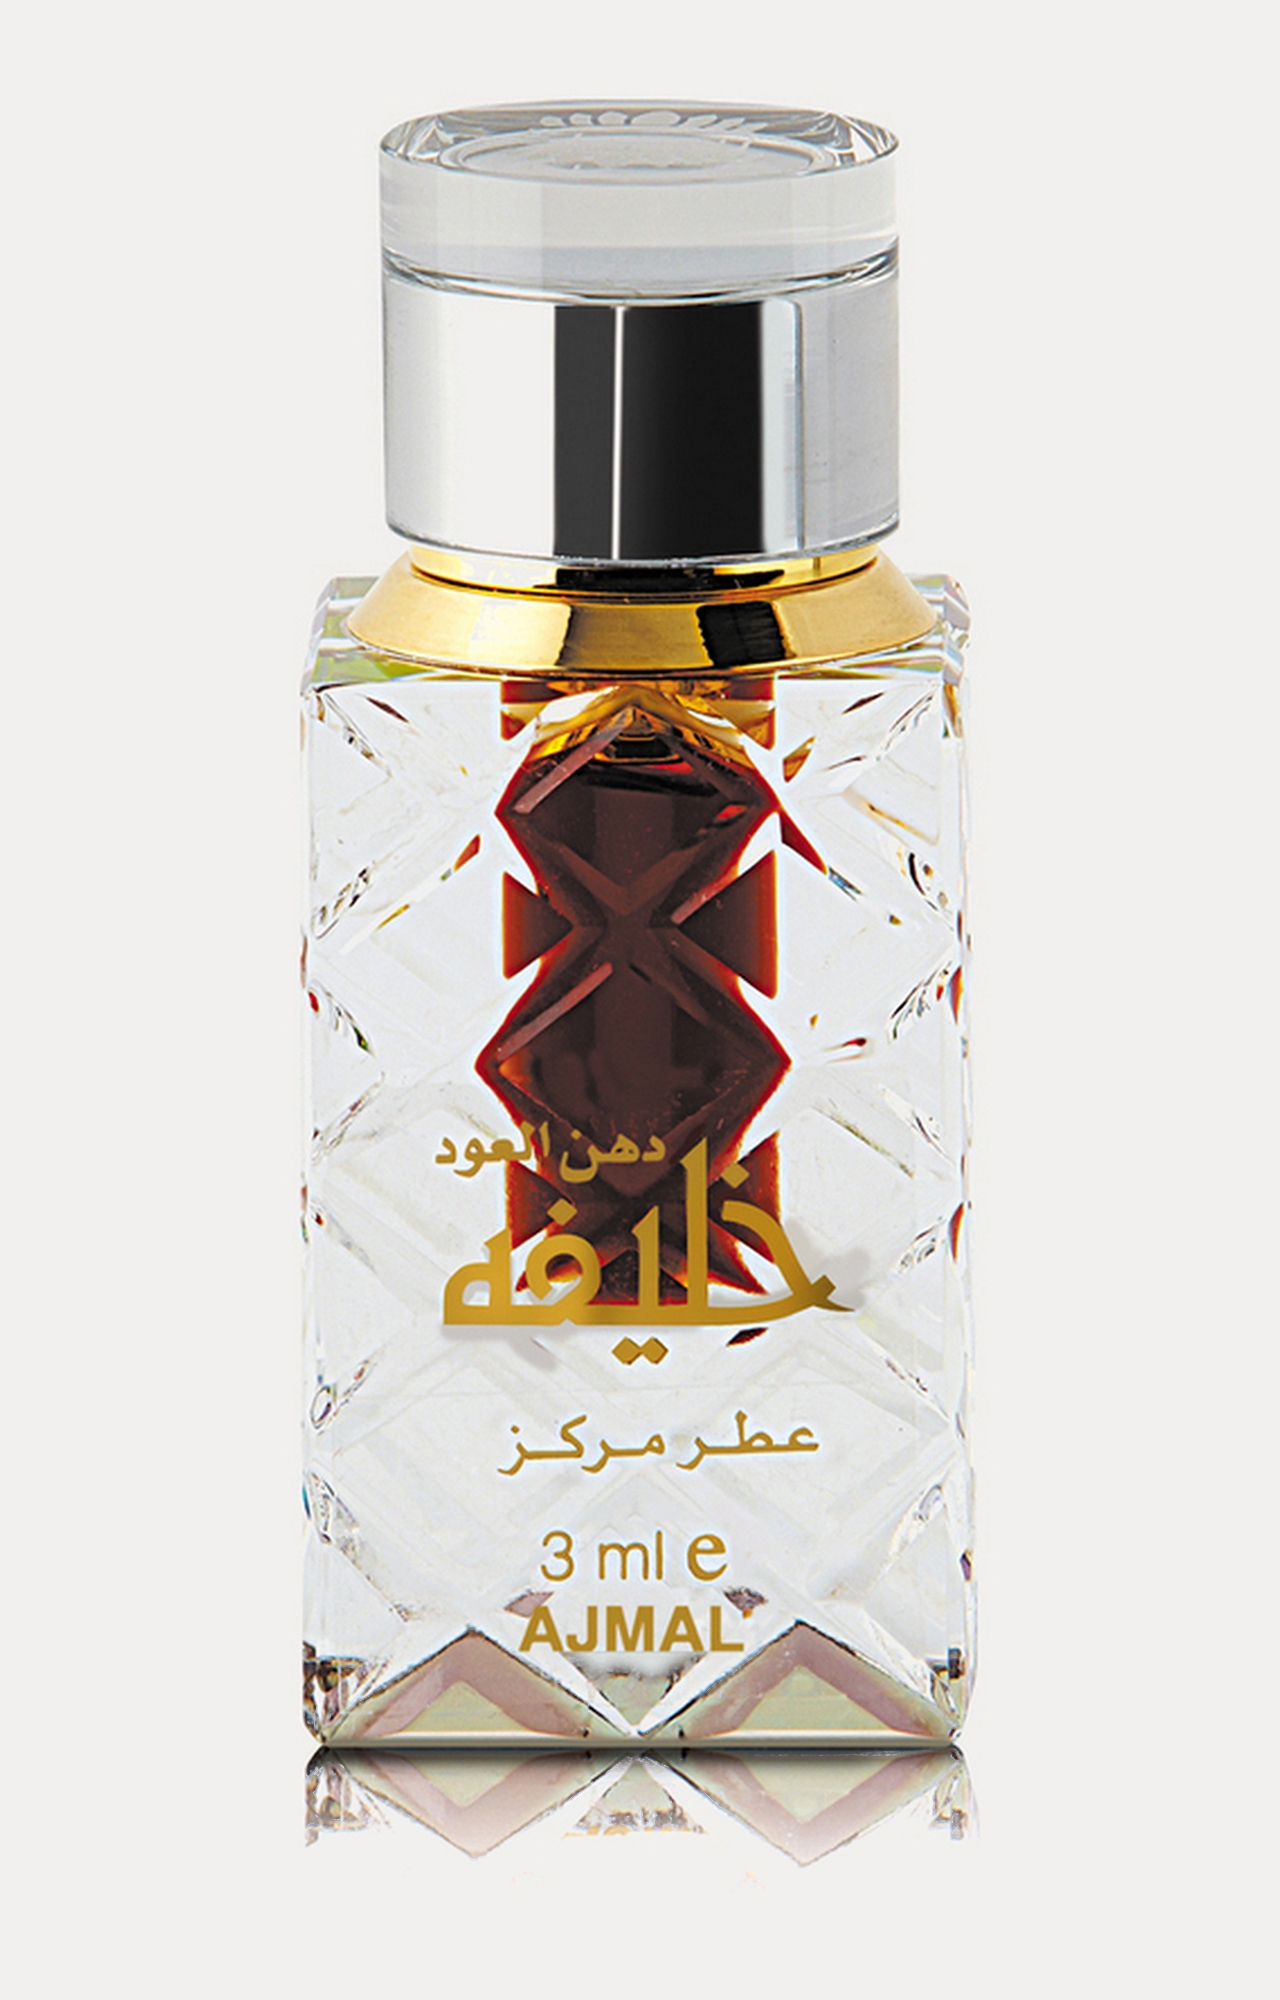 Ajmal | Ajmal Dahnul Oudh Khalifa Concentrated Perfume Free From Alcohol 3ml for Unisex 0